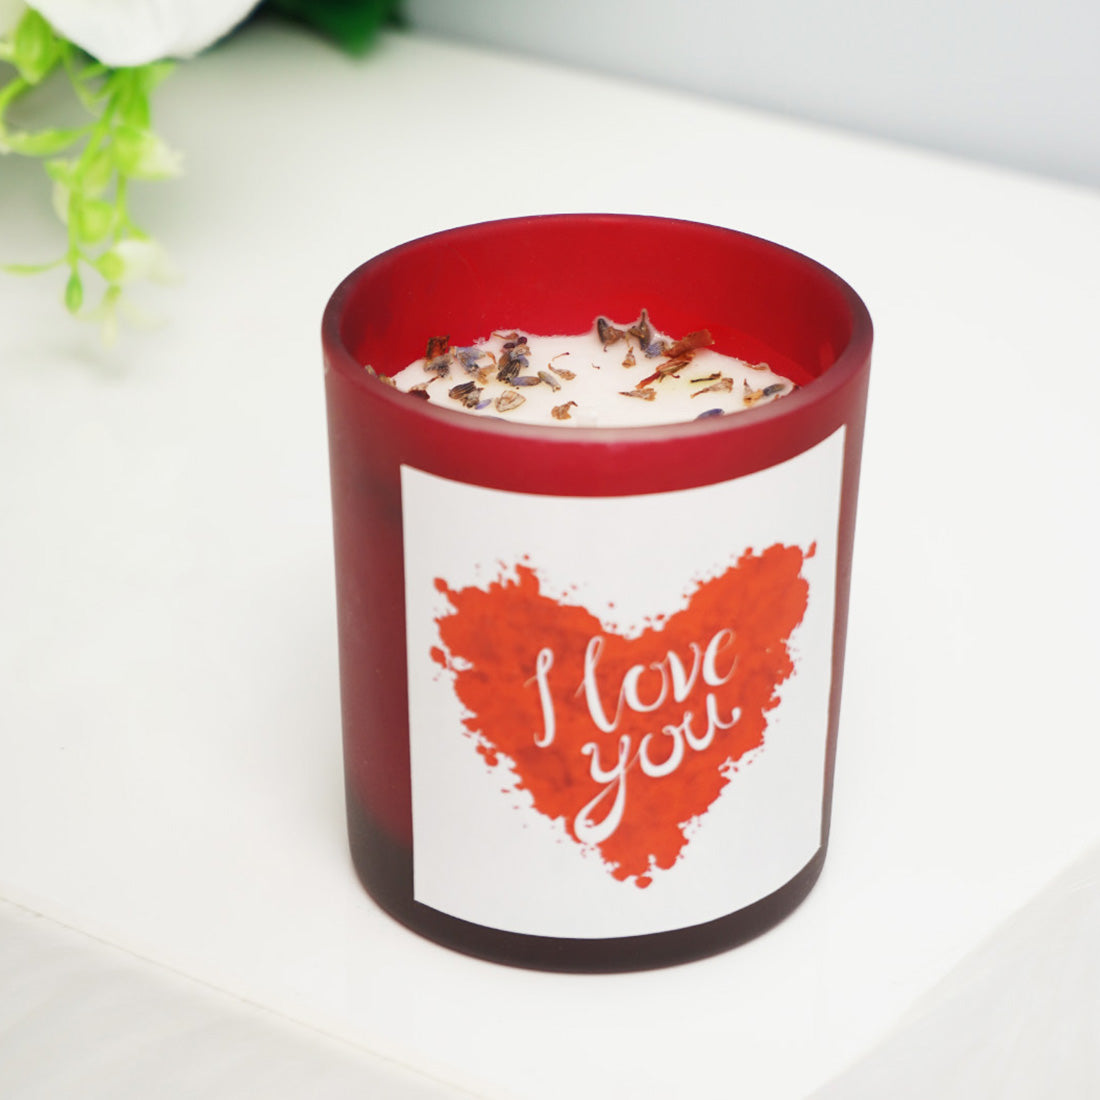 Express Your Love Gifts for Her Him Women Wife Husband Girlfriend Boyfriend Unique Gift Ideas, Natural Soy Candles for Bath Yoga Home